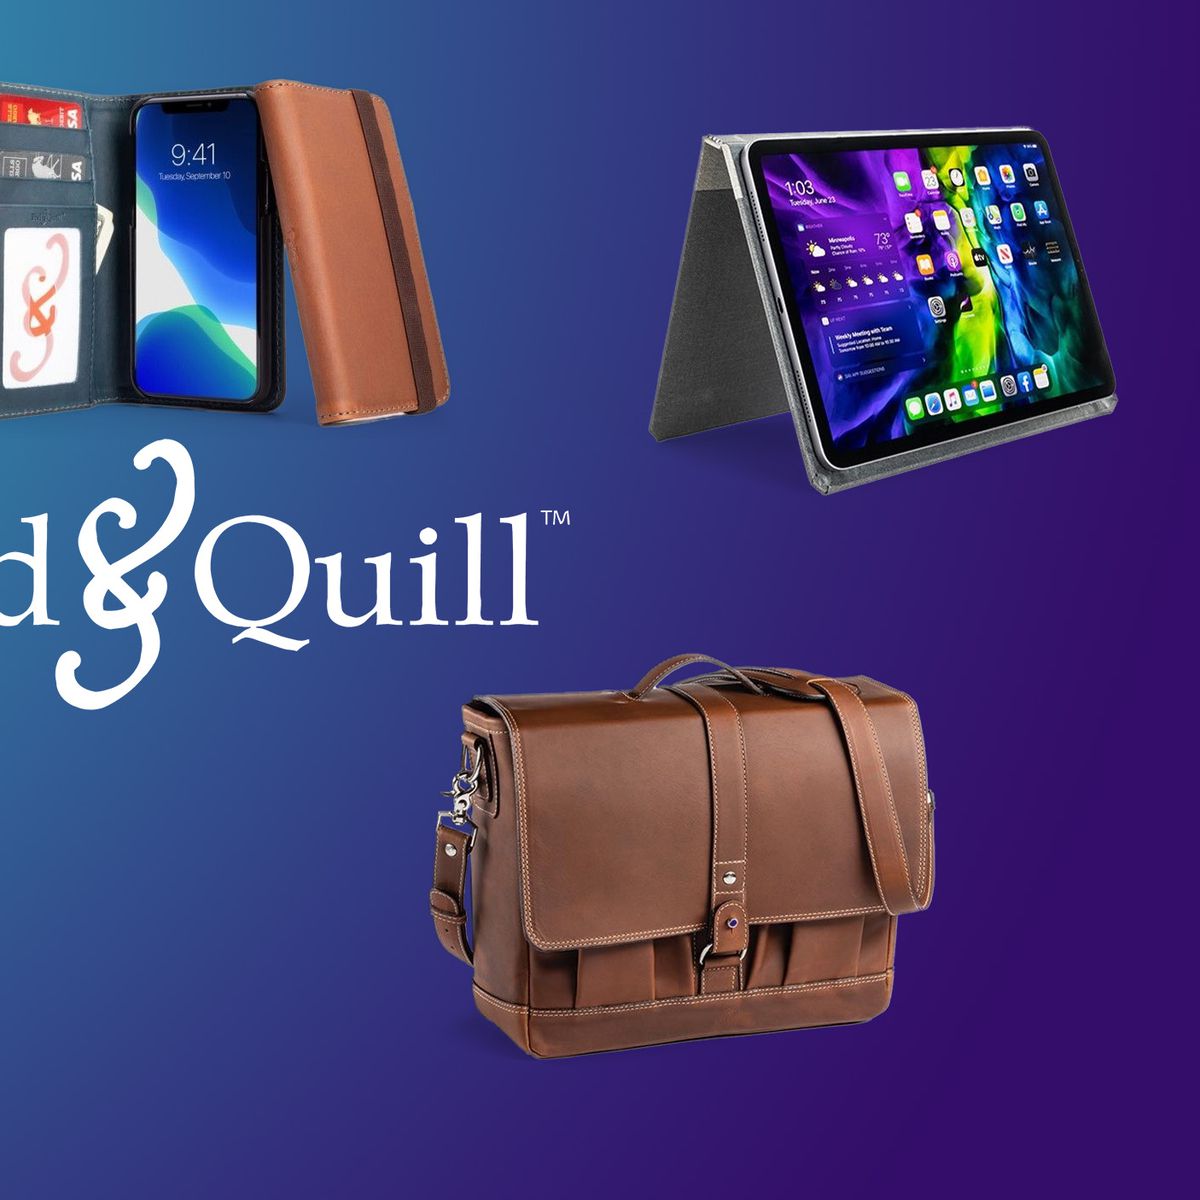 Apple Accessory Maker Pad & Quill Shutting Down, Offering 50% Off Sitewide  - MacRumors